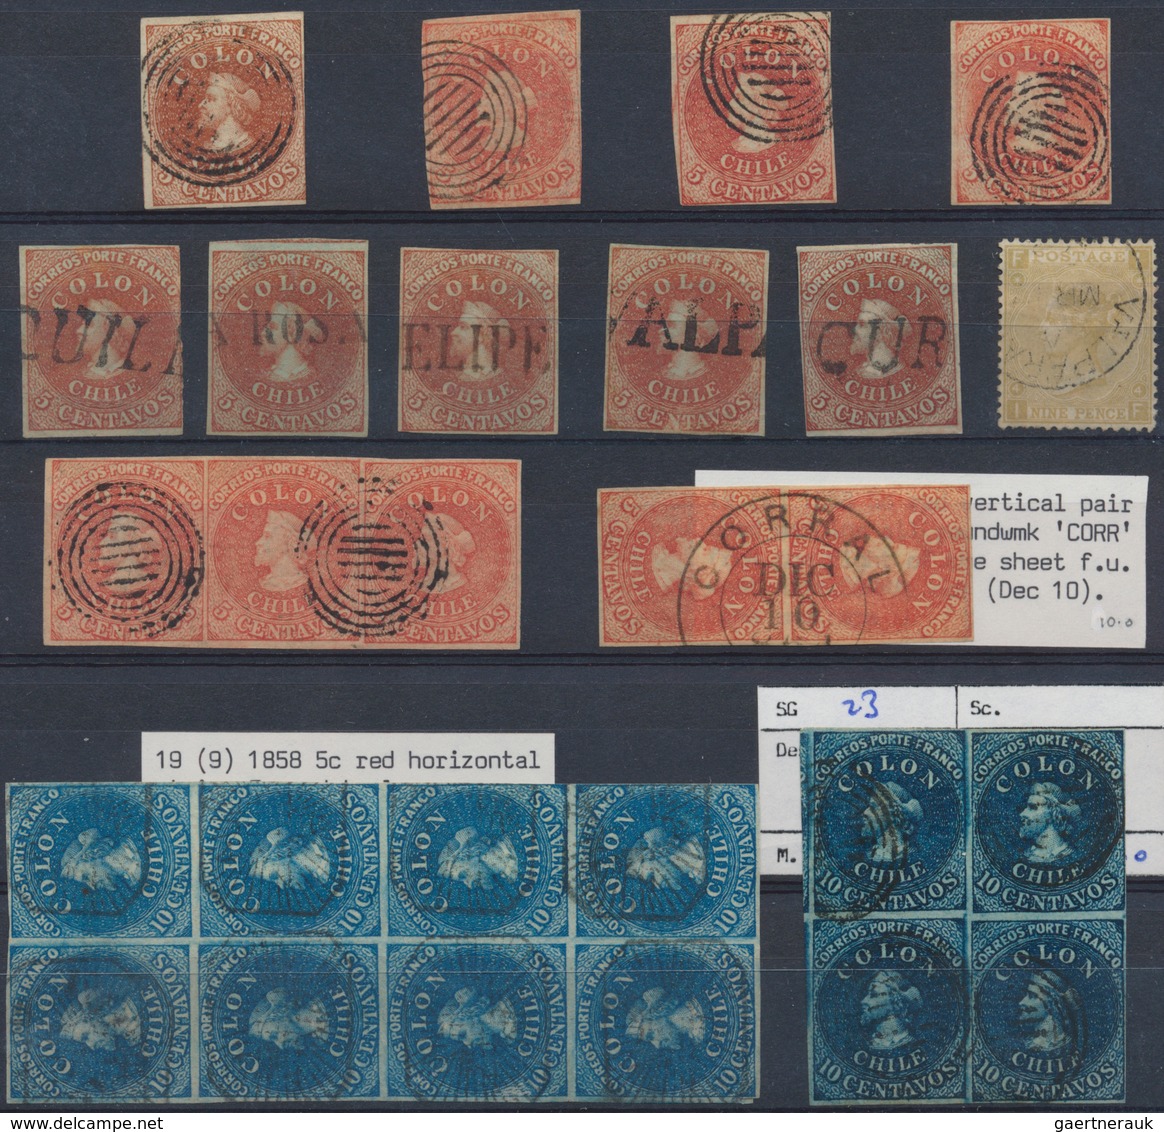 Chile: 1853/1867, COLON HEADS, the outstanding collection of first issues incl. 1853 5c. used on ent